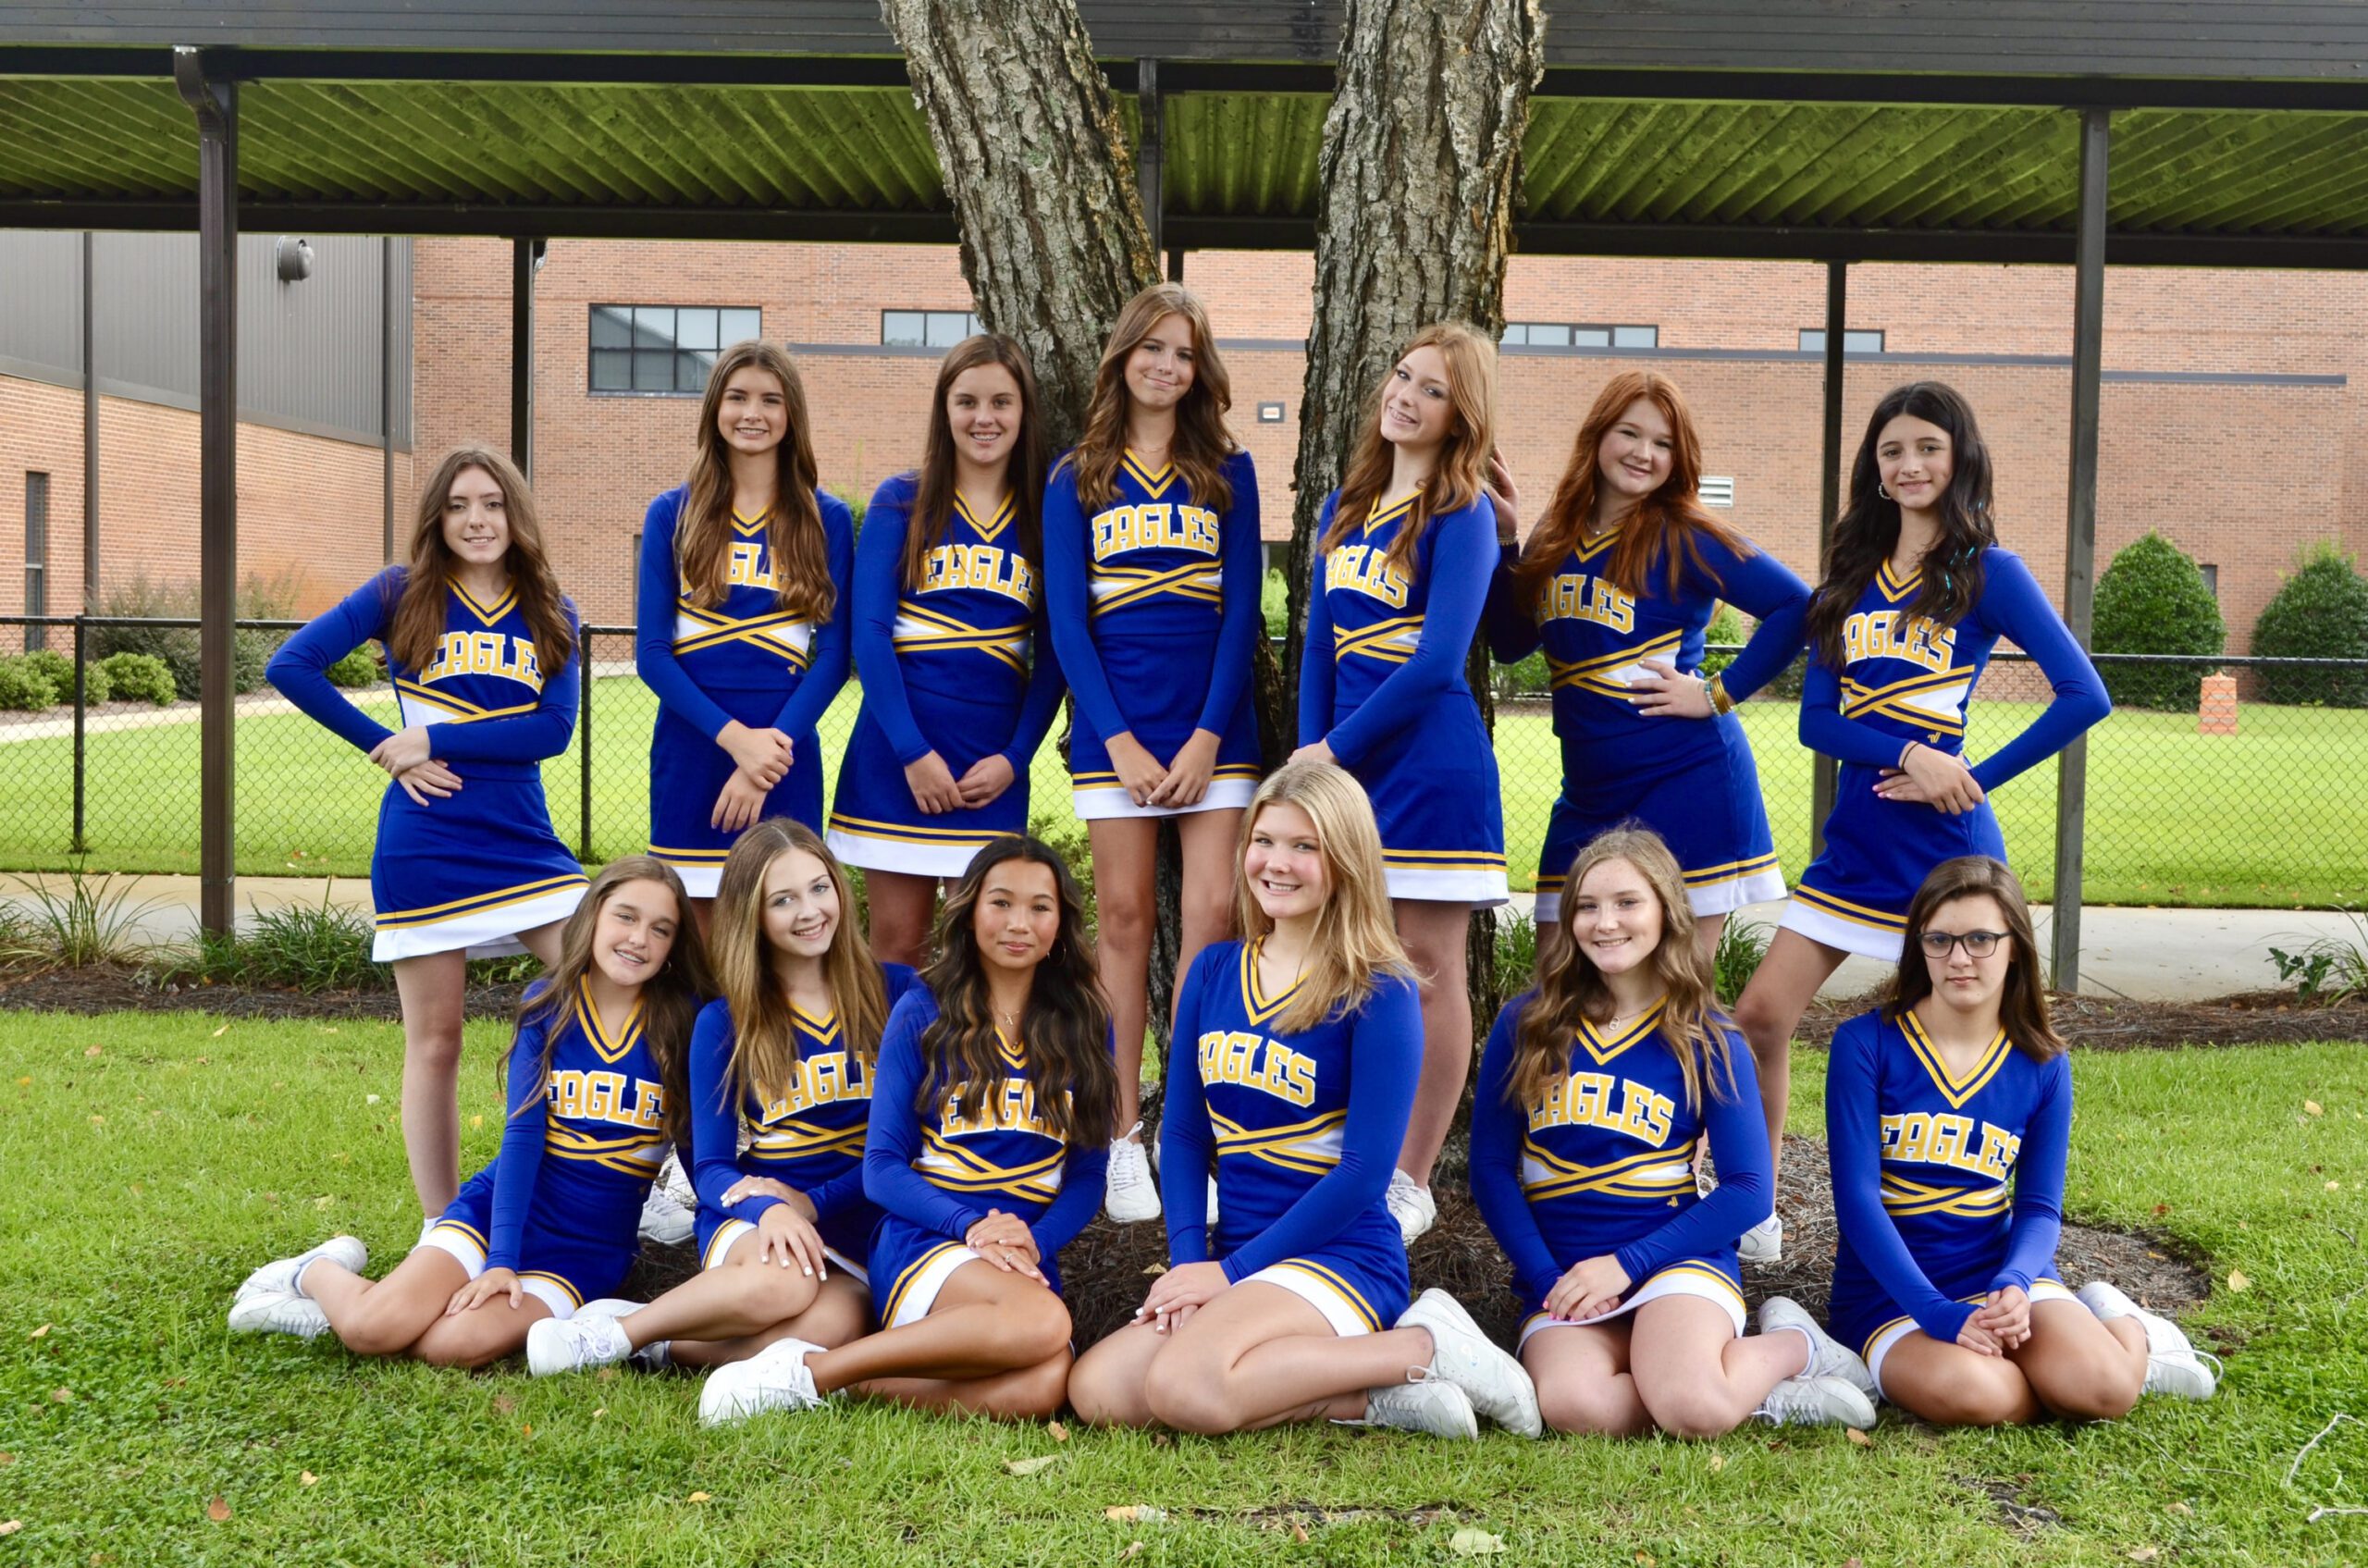 Girls posing in their cheer uniform at Florence Christian School